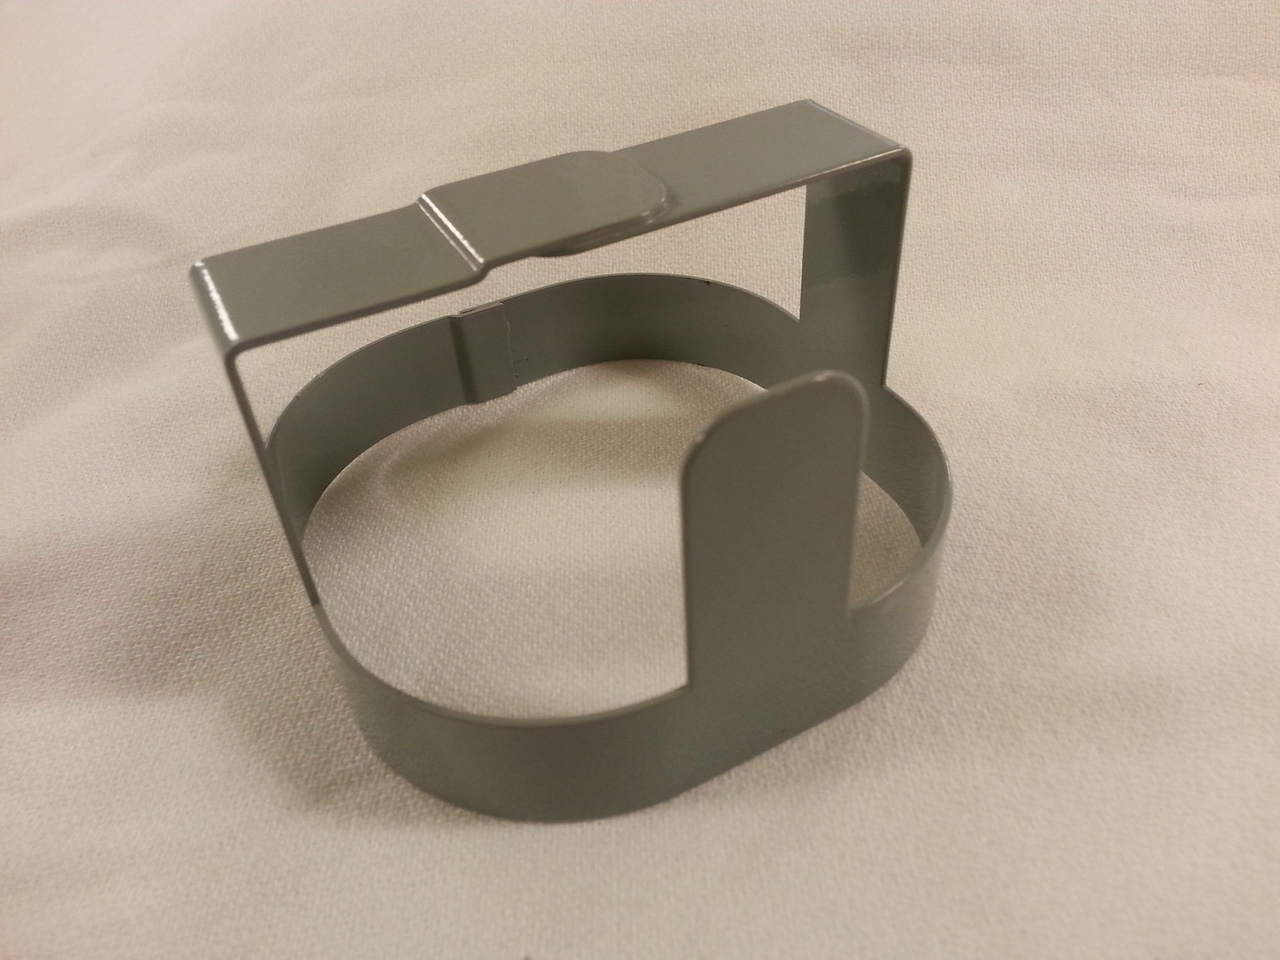 Focus Ring for Cambium 5.8 GHz products